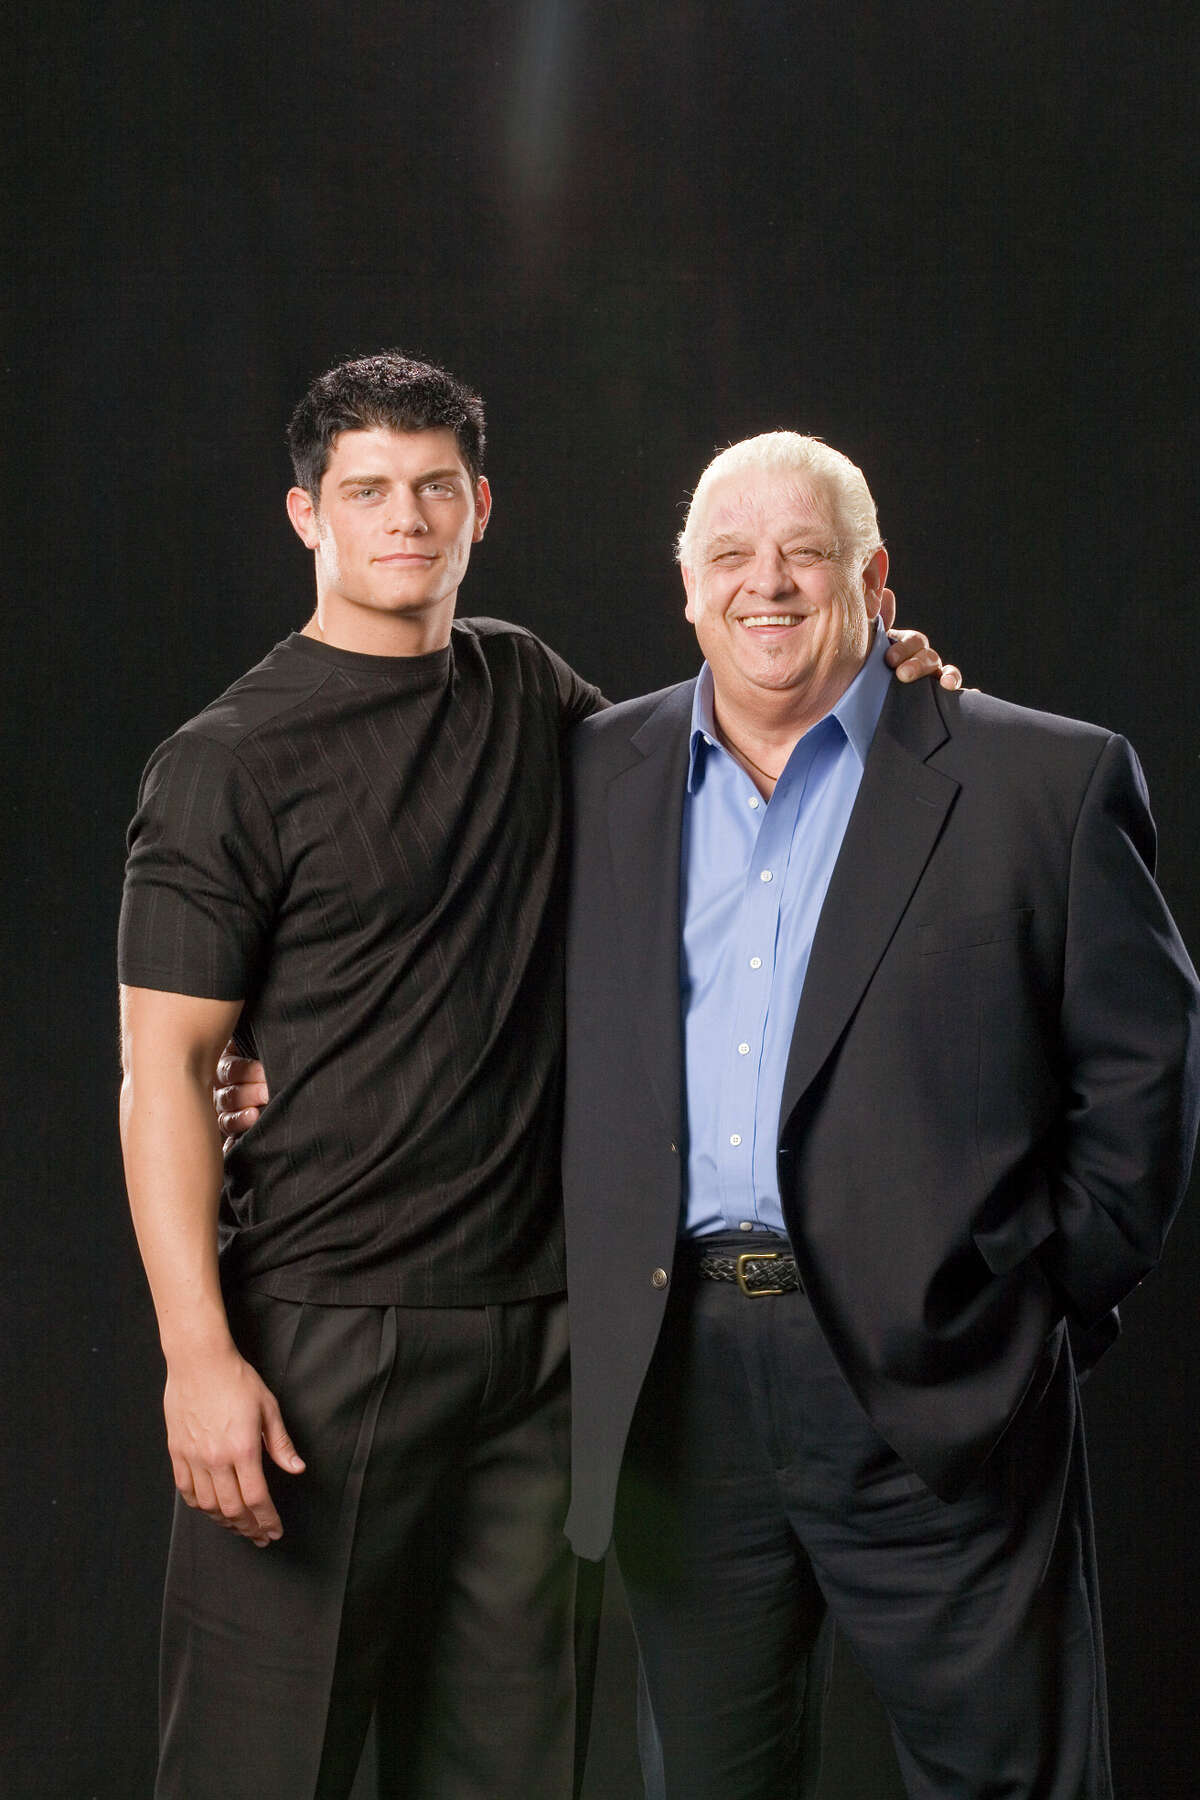 Cody Rhodes, 26, is one of the brightest young superstars in the World Wrestling Federation. His father Dusty Rhodes also was a wrestler.